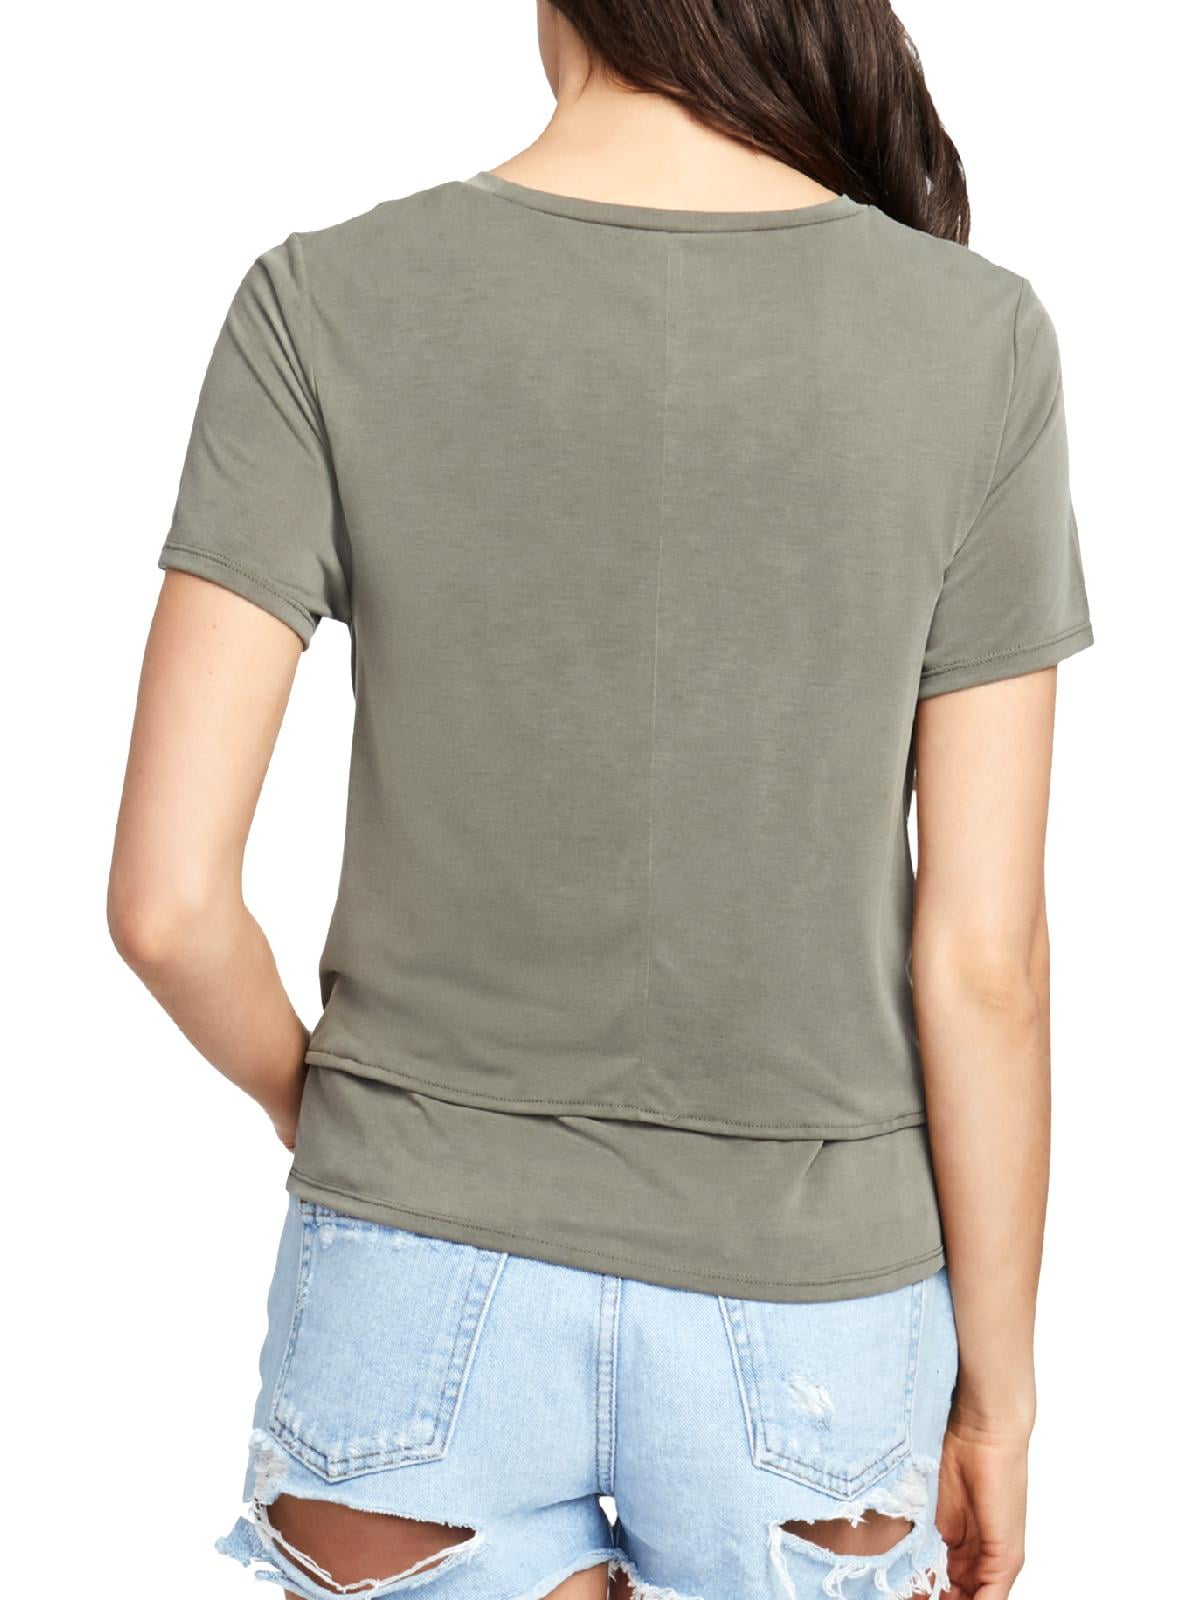 Rachel Roy Womens Cropped Tie Front Basic T-Shirt